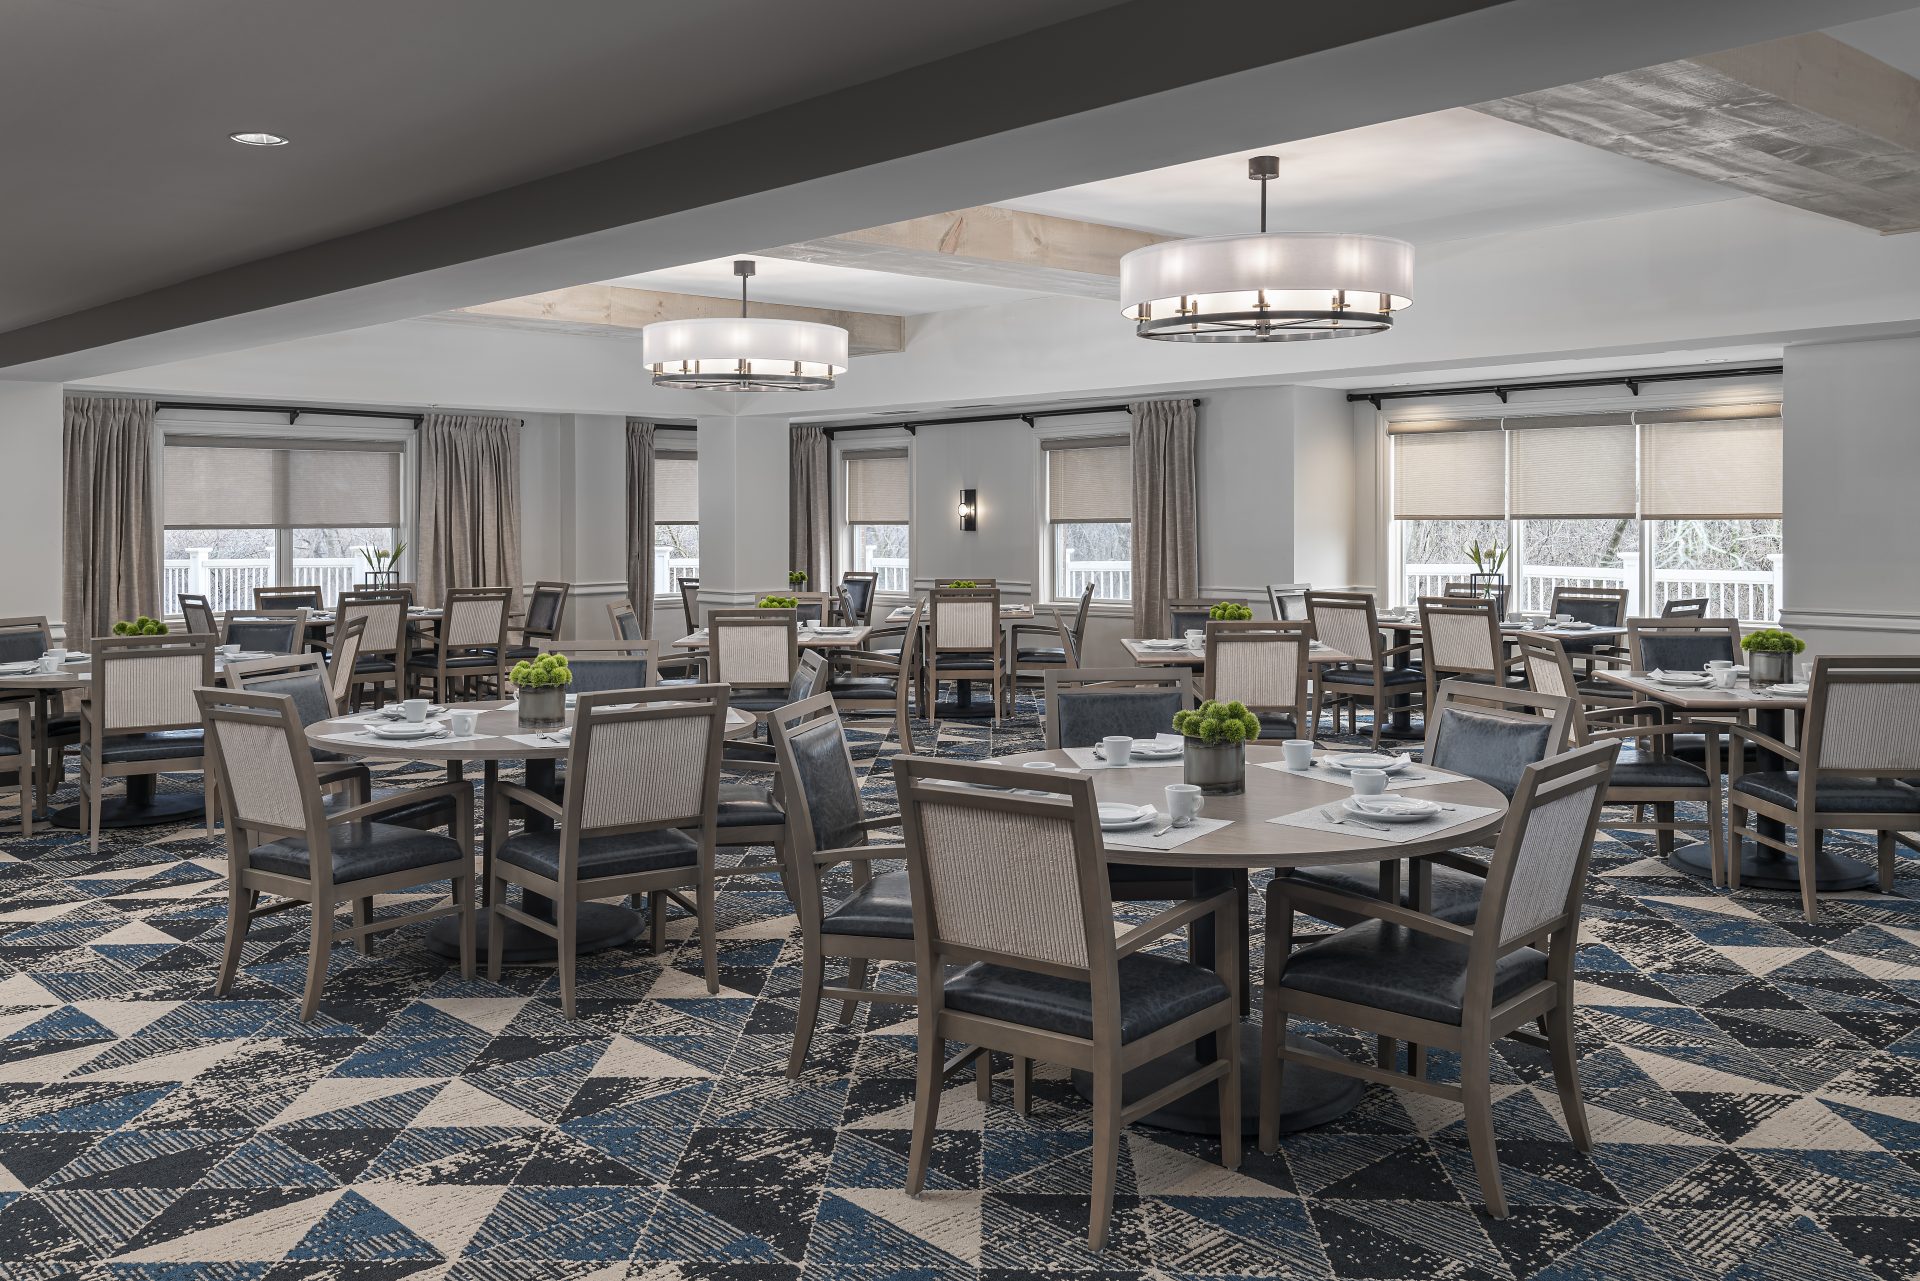 Elegant dining area with multiple tables and chairs in a senior living community.